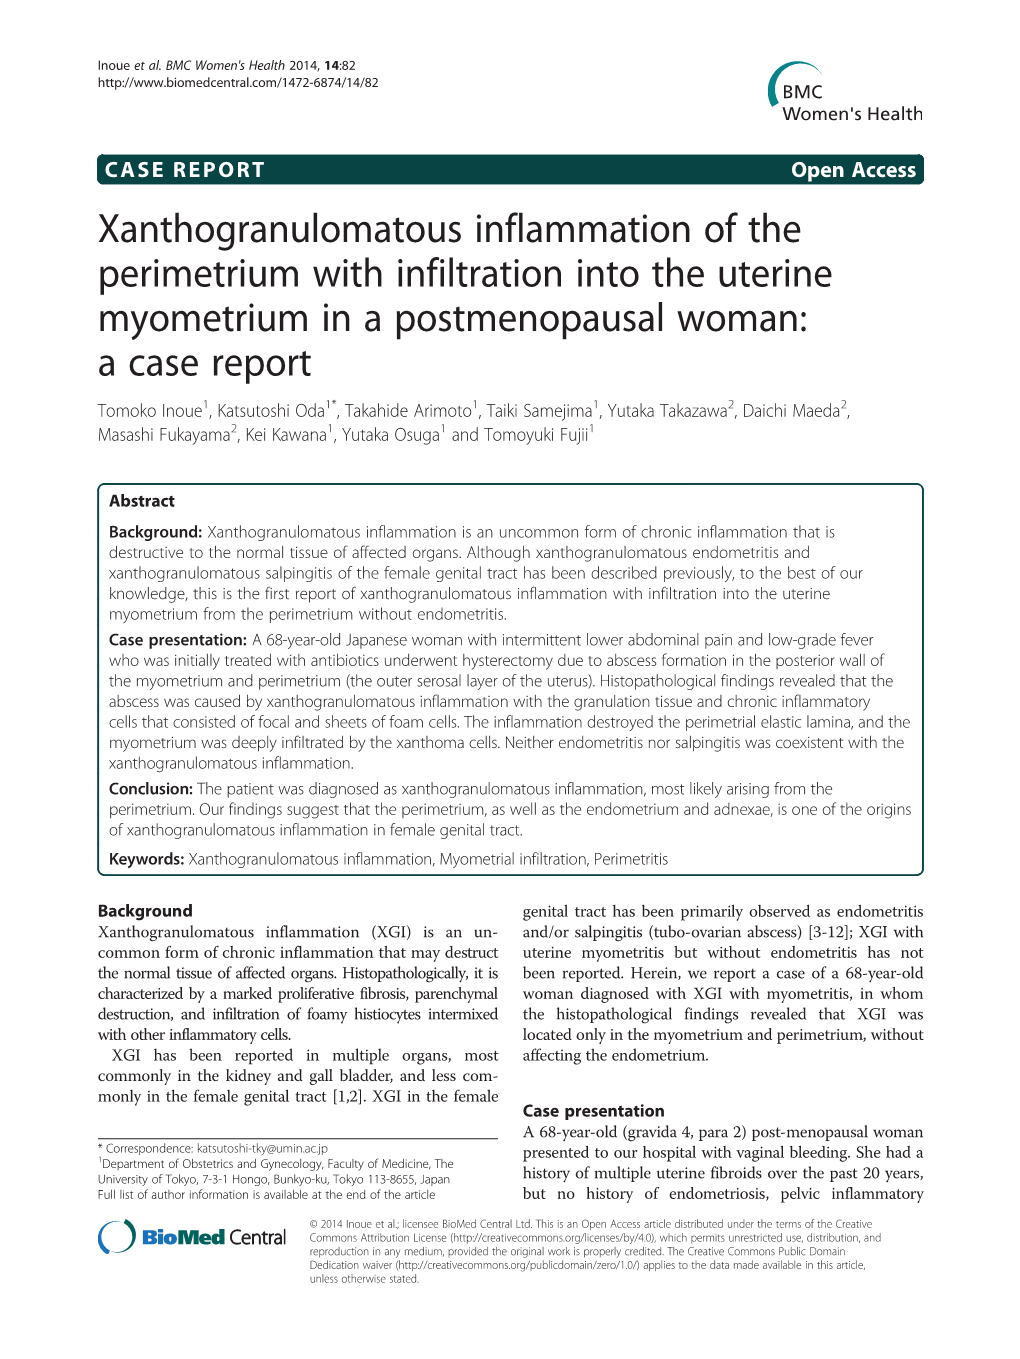 Xanthogranulomatous Inflammation of the Perimetrium with Infiltration Into